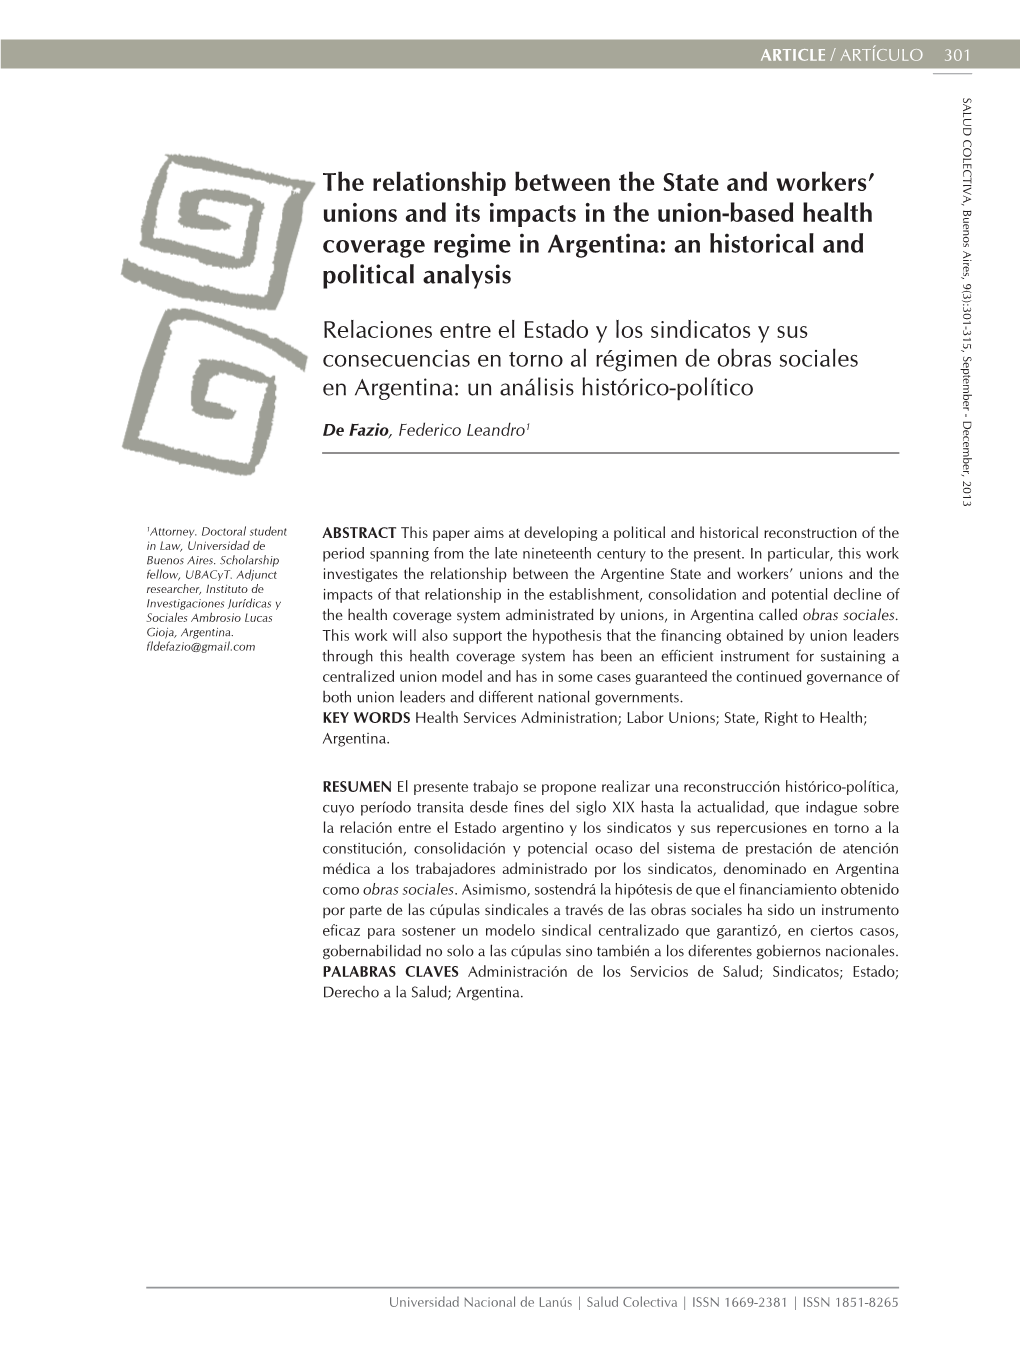 The Relationship Between the State and Workers' Unions and Its Impacts in the Union-Based Health Coverage Regime in Argentina